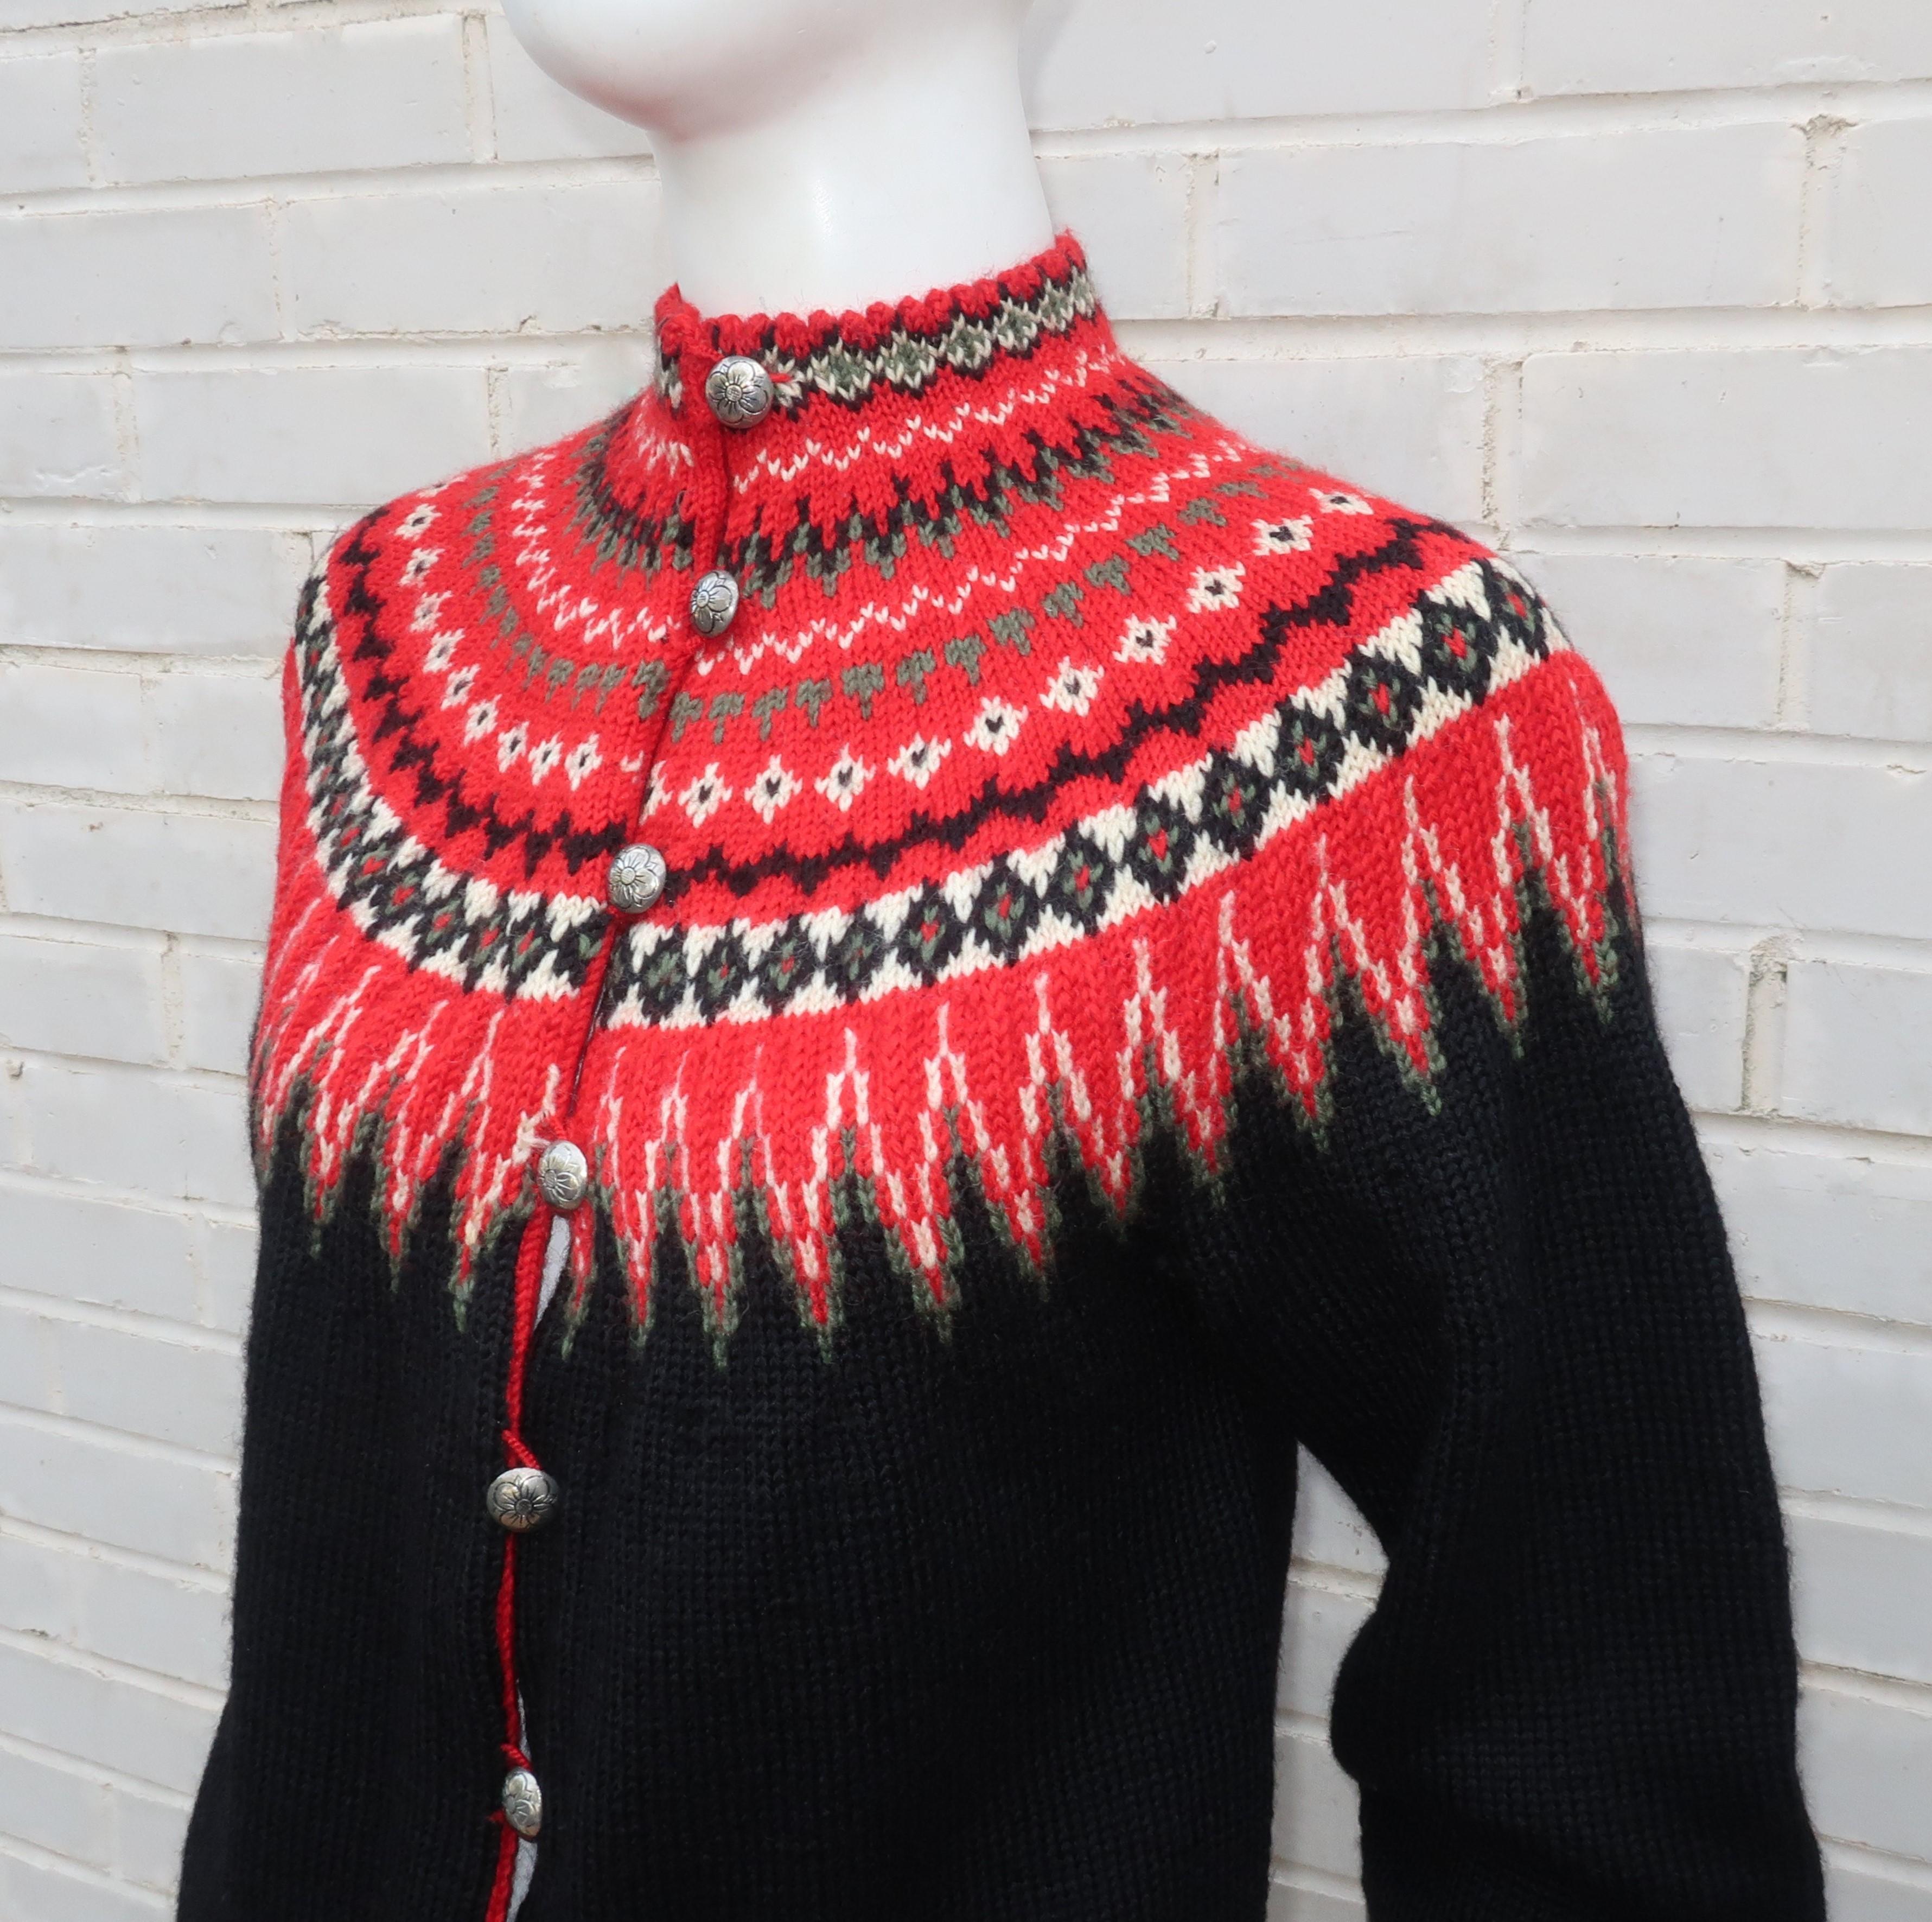 C.1950 fair isle style wool sweater by Norwegian knitwear company, William Schmidt of Oslo.  The intricate red, white and green geometric pattern at the neckline set against a black background creates a subtle trompe l'oeil effect that could almost